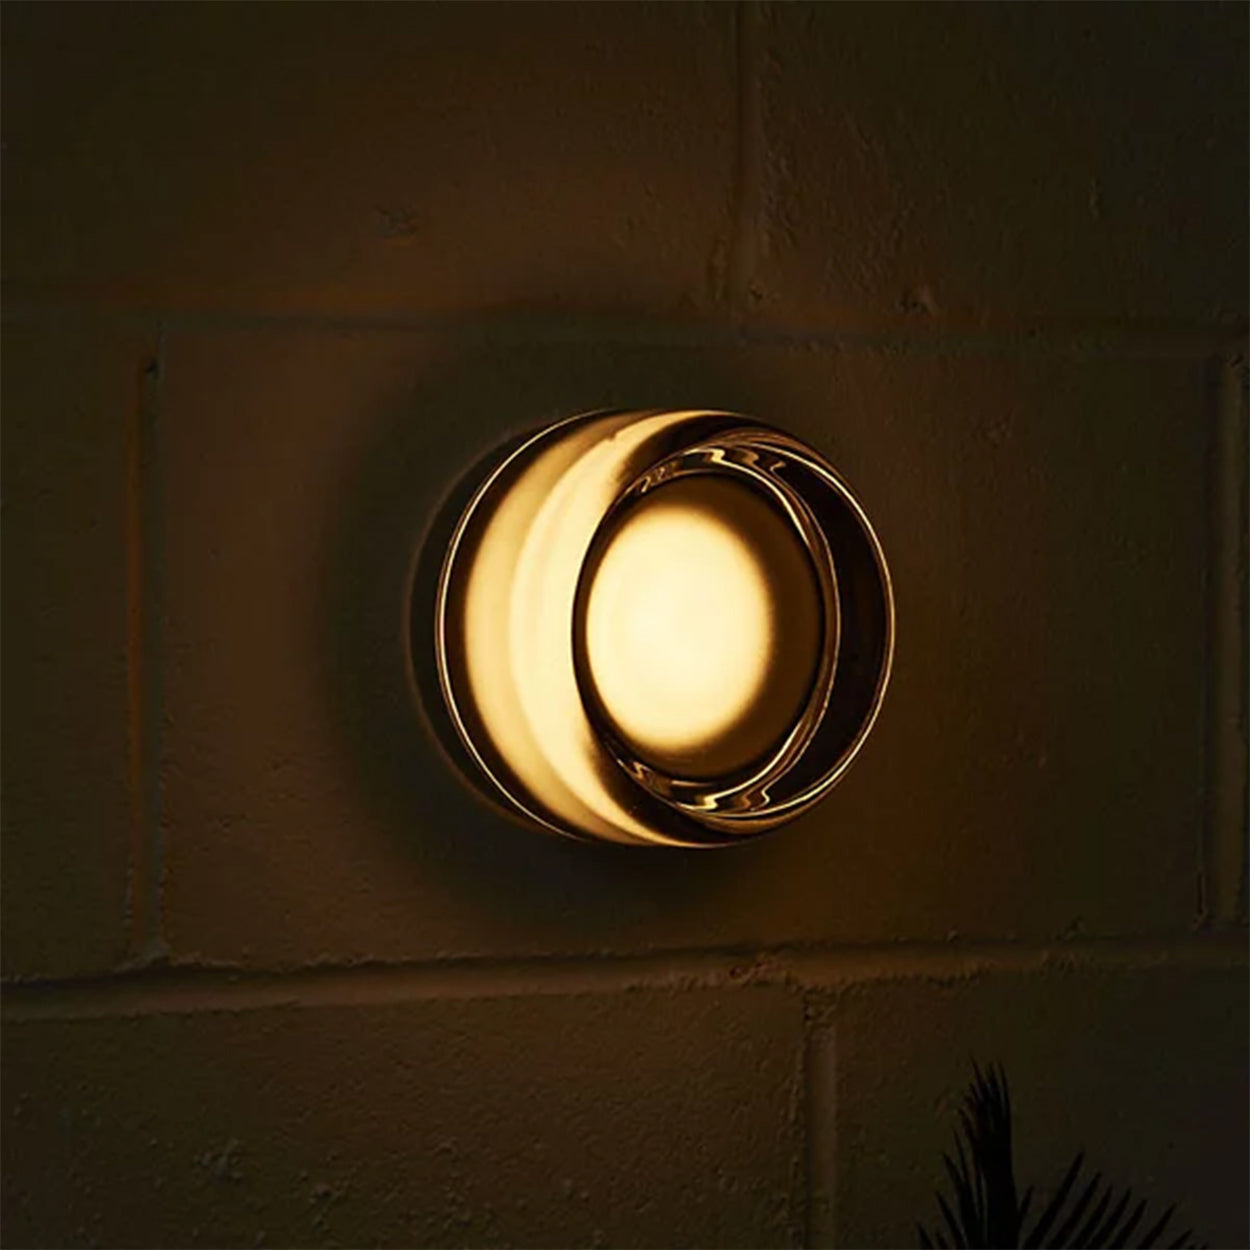 ANKUR DIMPLE CONTEMPORARY LED WALL LIGHT / CEILING LIGHT